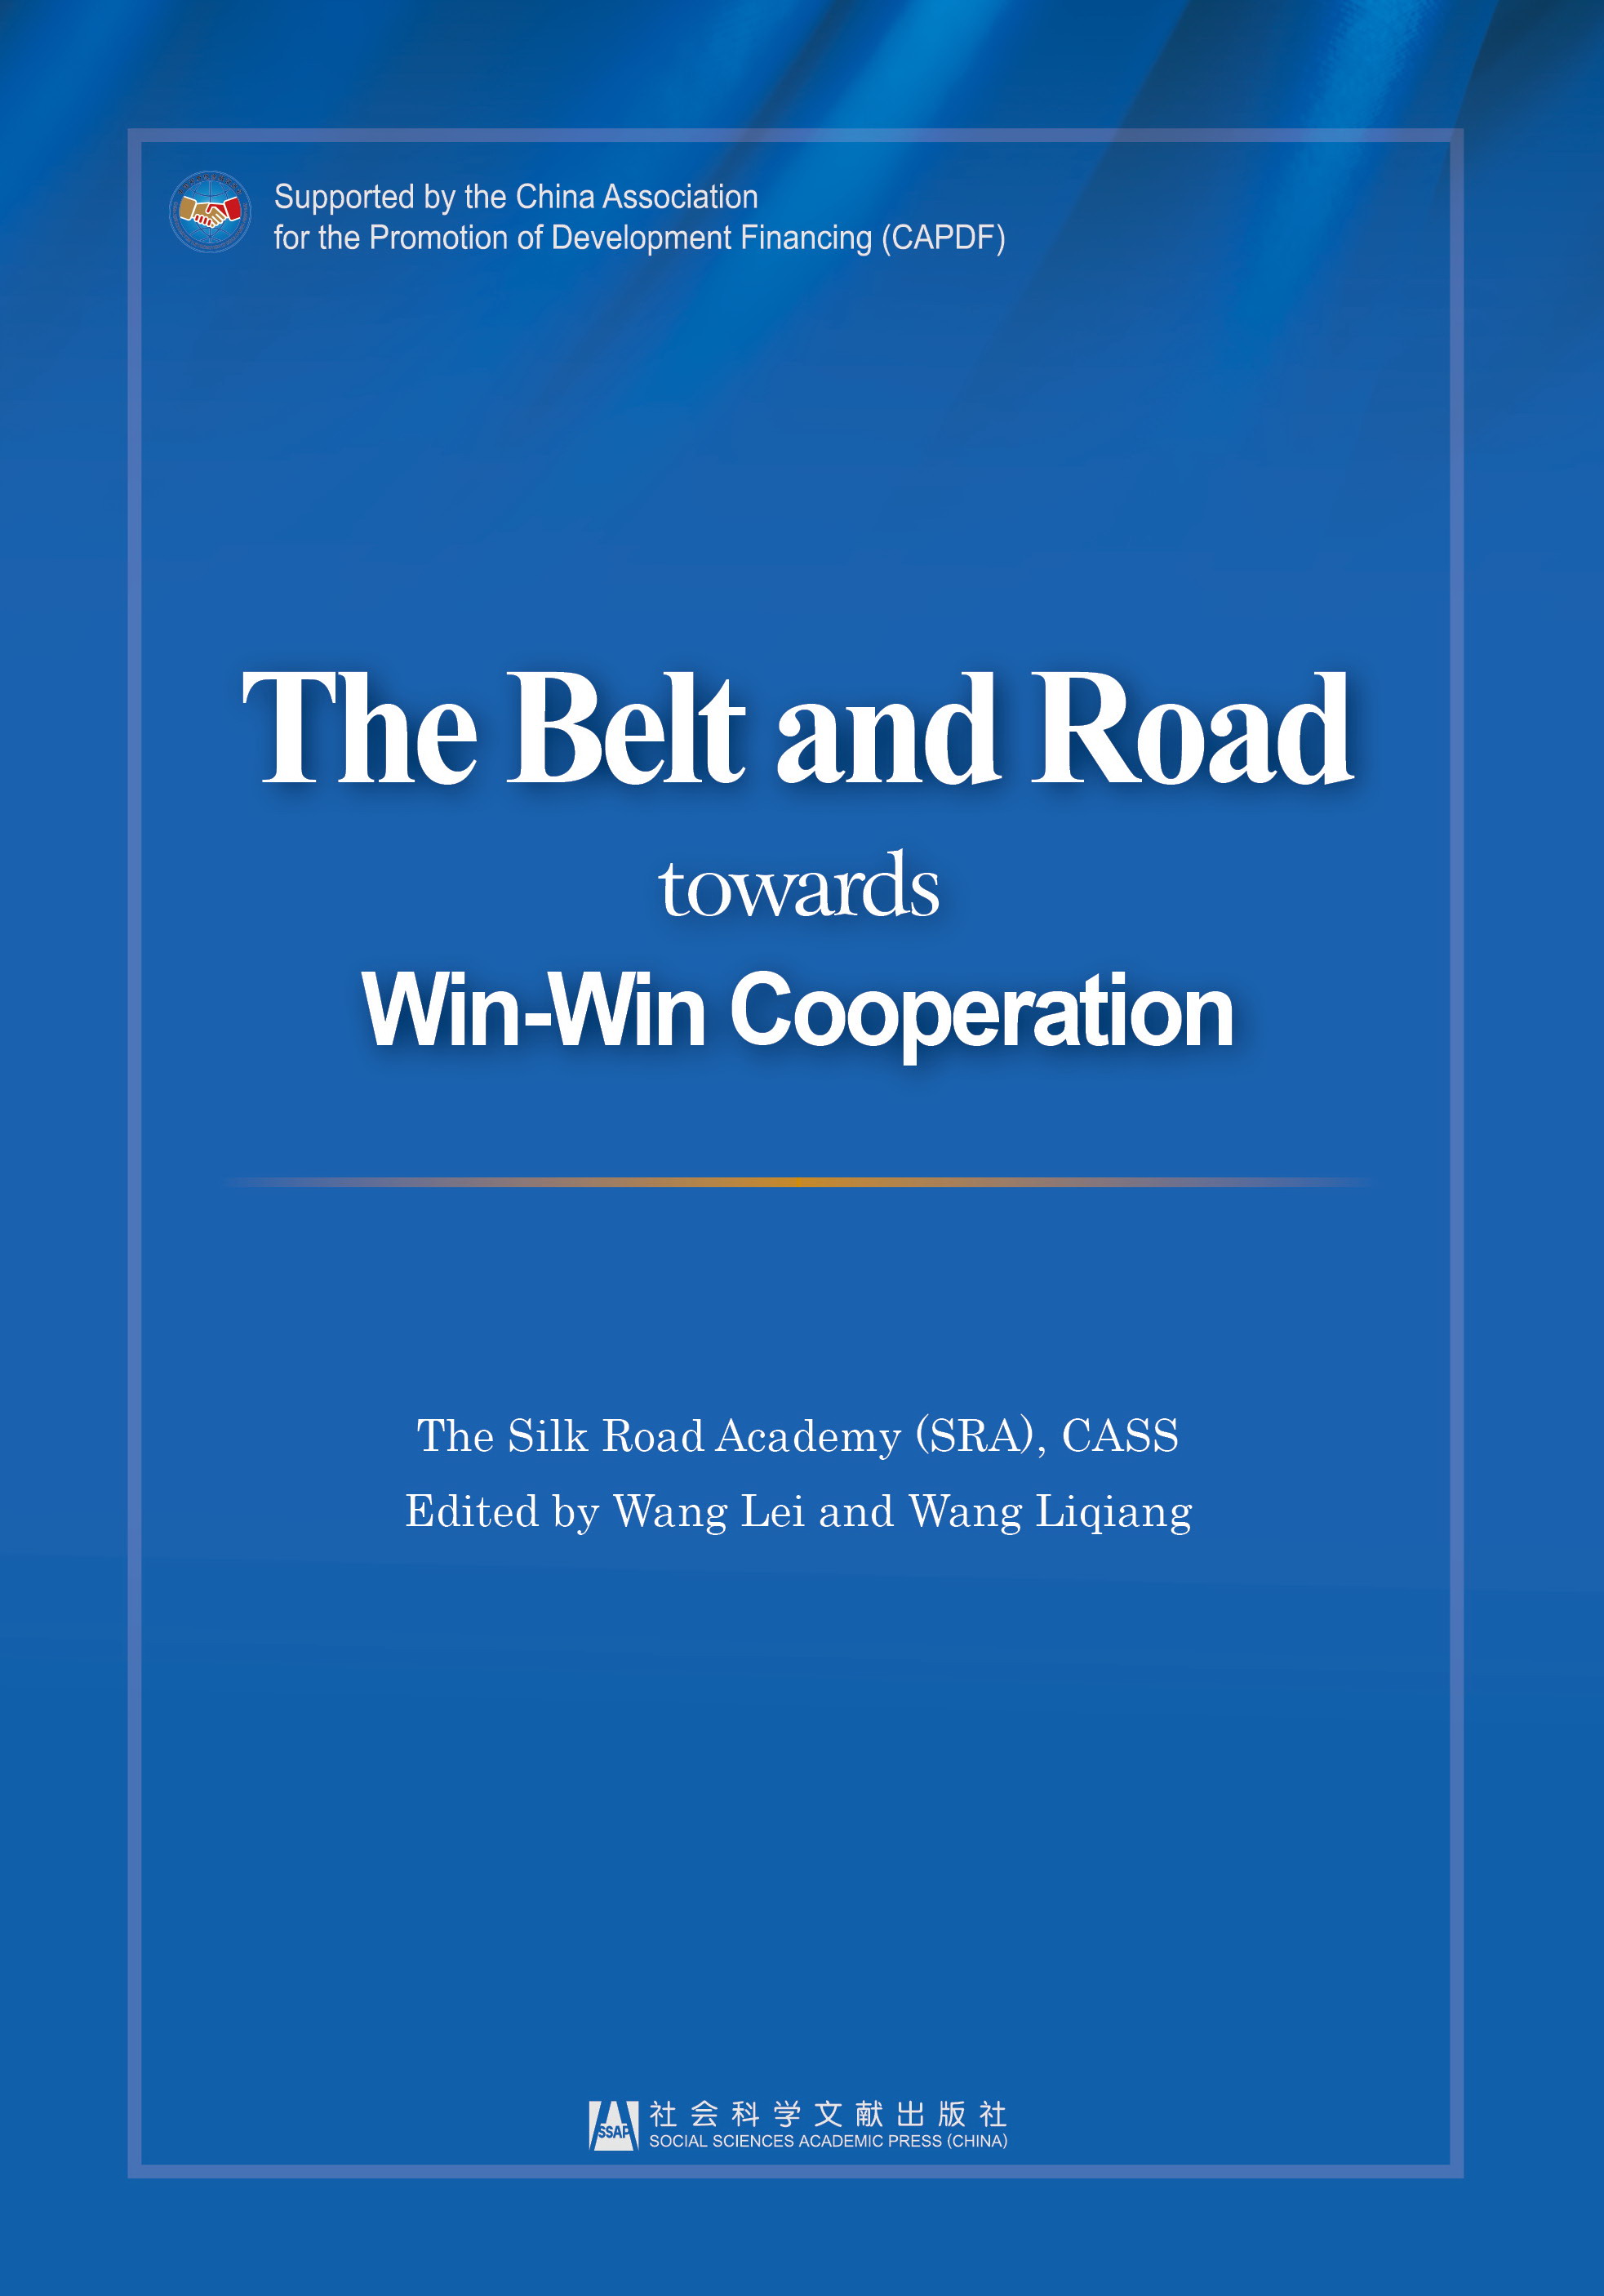 The Belt and Road towards Win-Win Cooperation